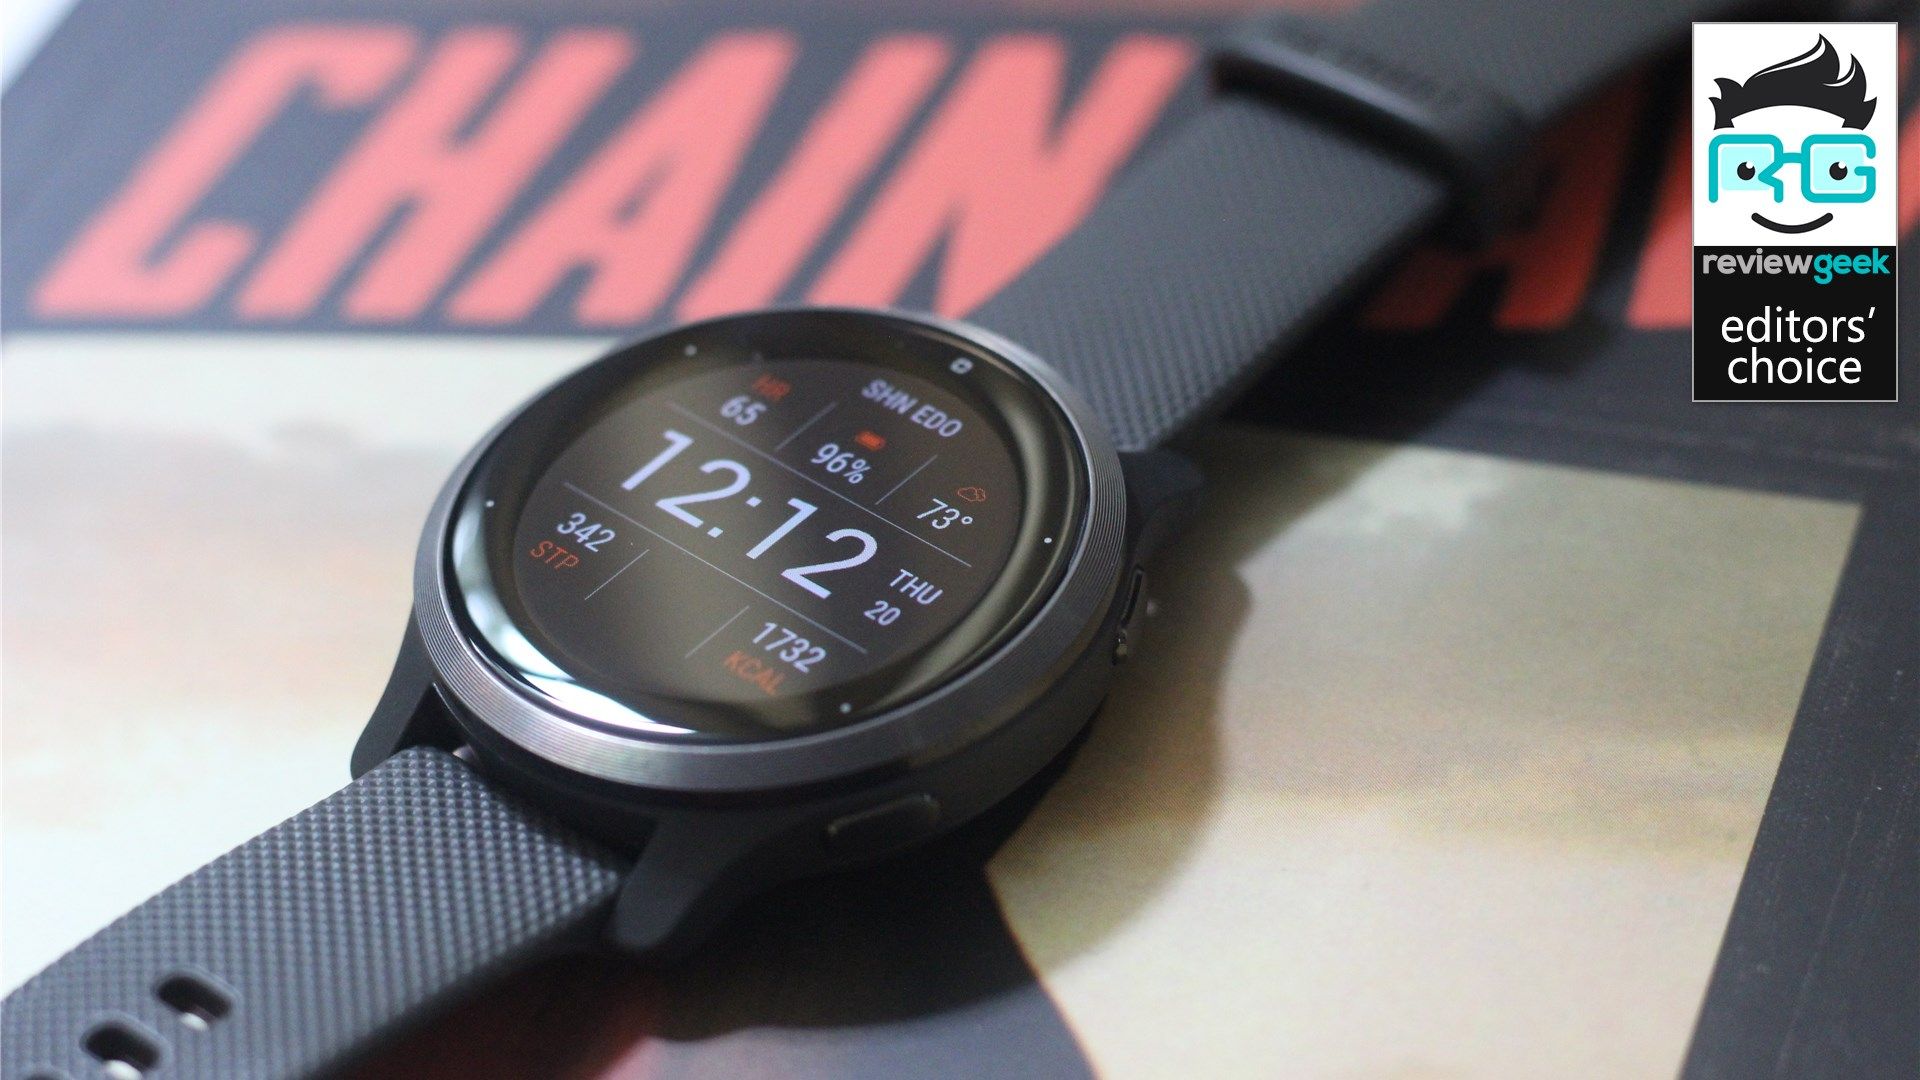 Garmin Venu 2s in review: Lots of great features including offline